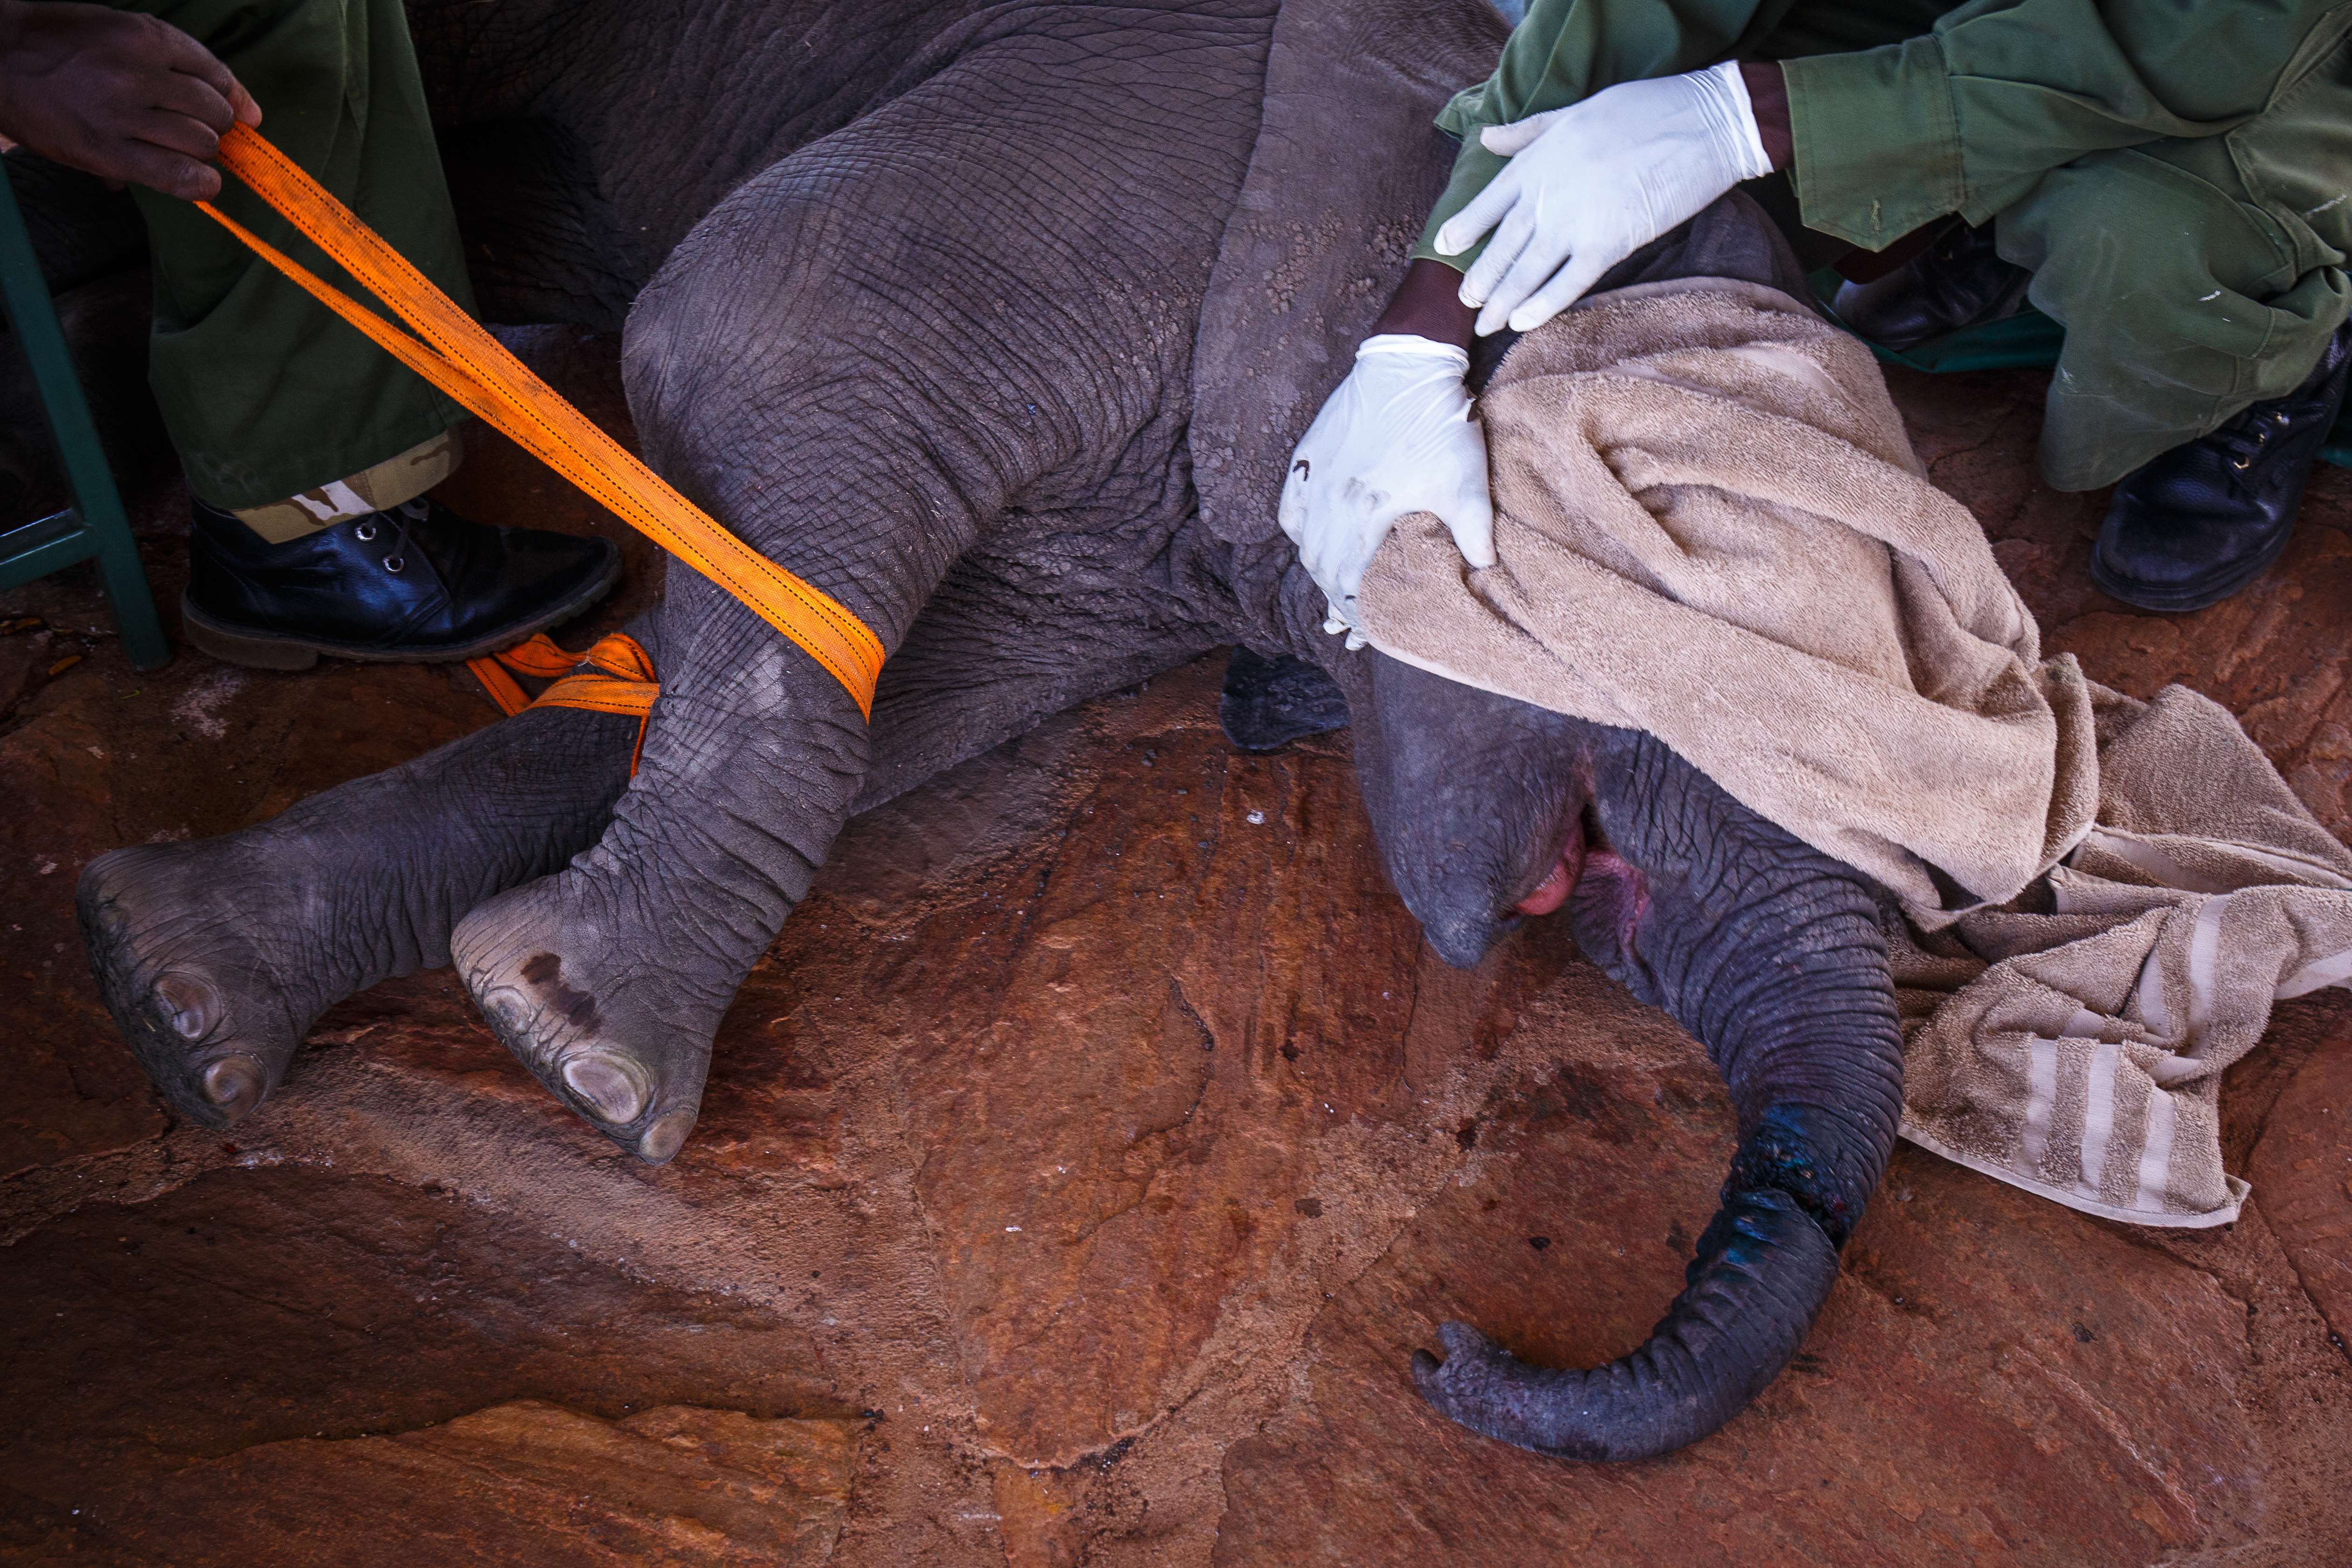 The calf awaits a chartered flight to David Sheldrick Wildlife Trust’s elephant orphanage in Nairobi to treat its injured trunk, after it was caught in a bushmeat snare in Kenya’s Mara Conservancy. Photo: Tessa Chan